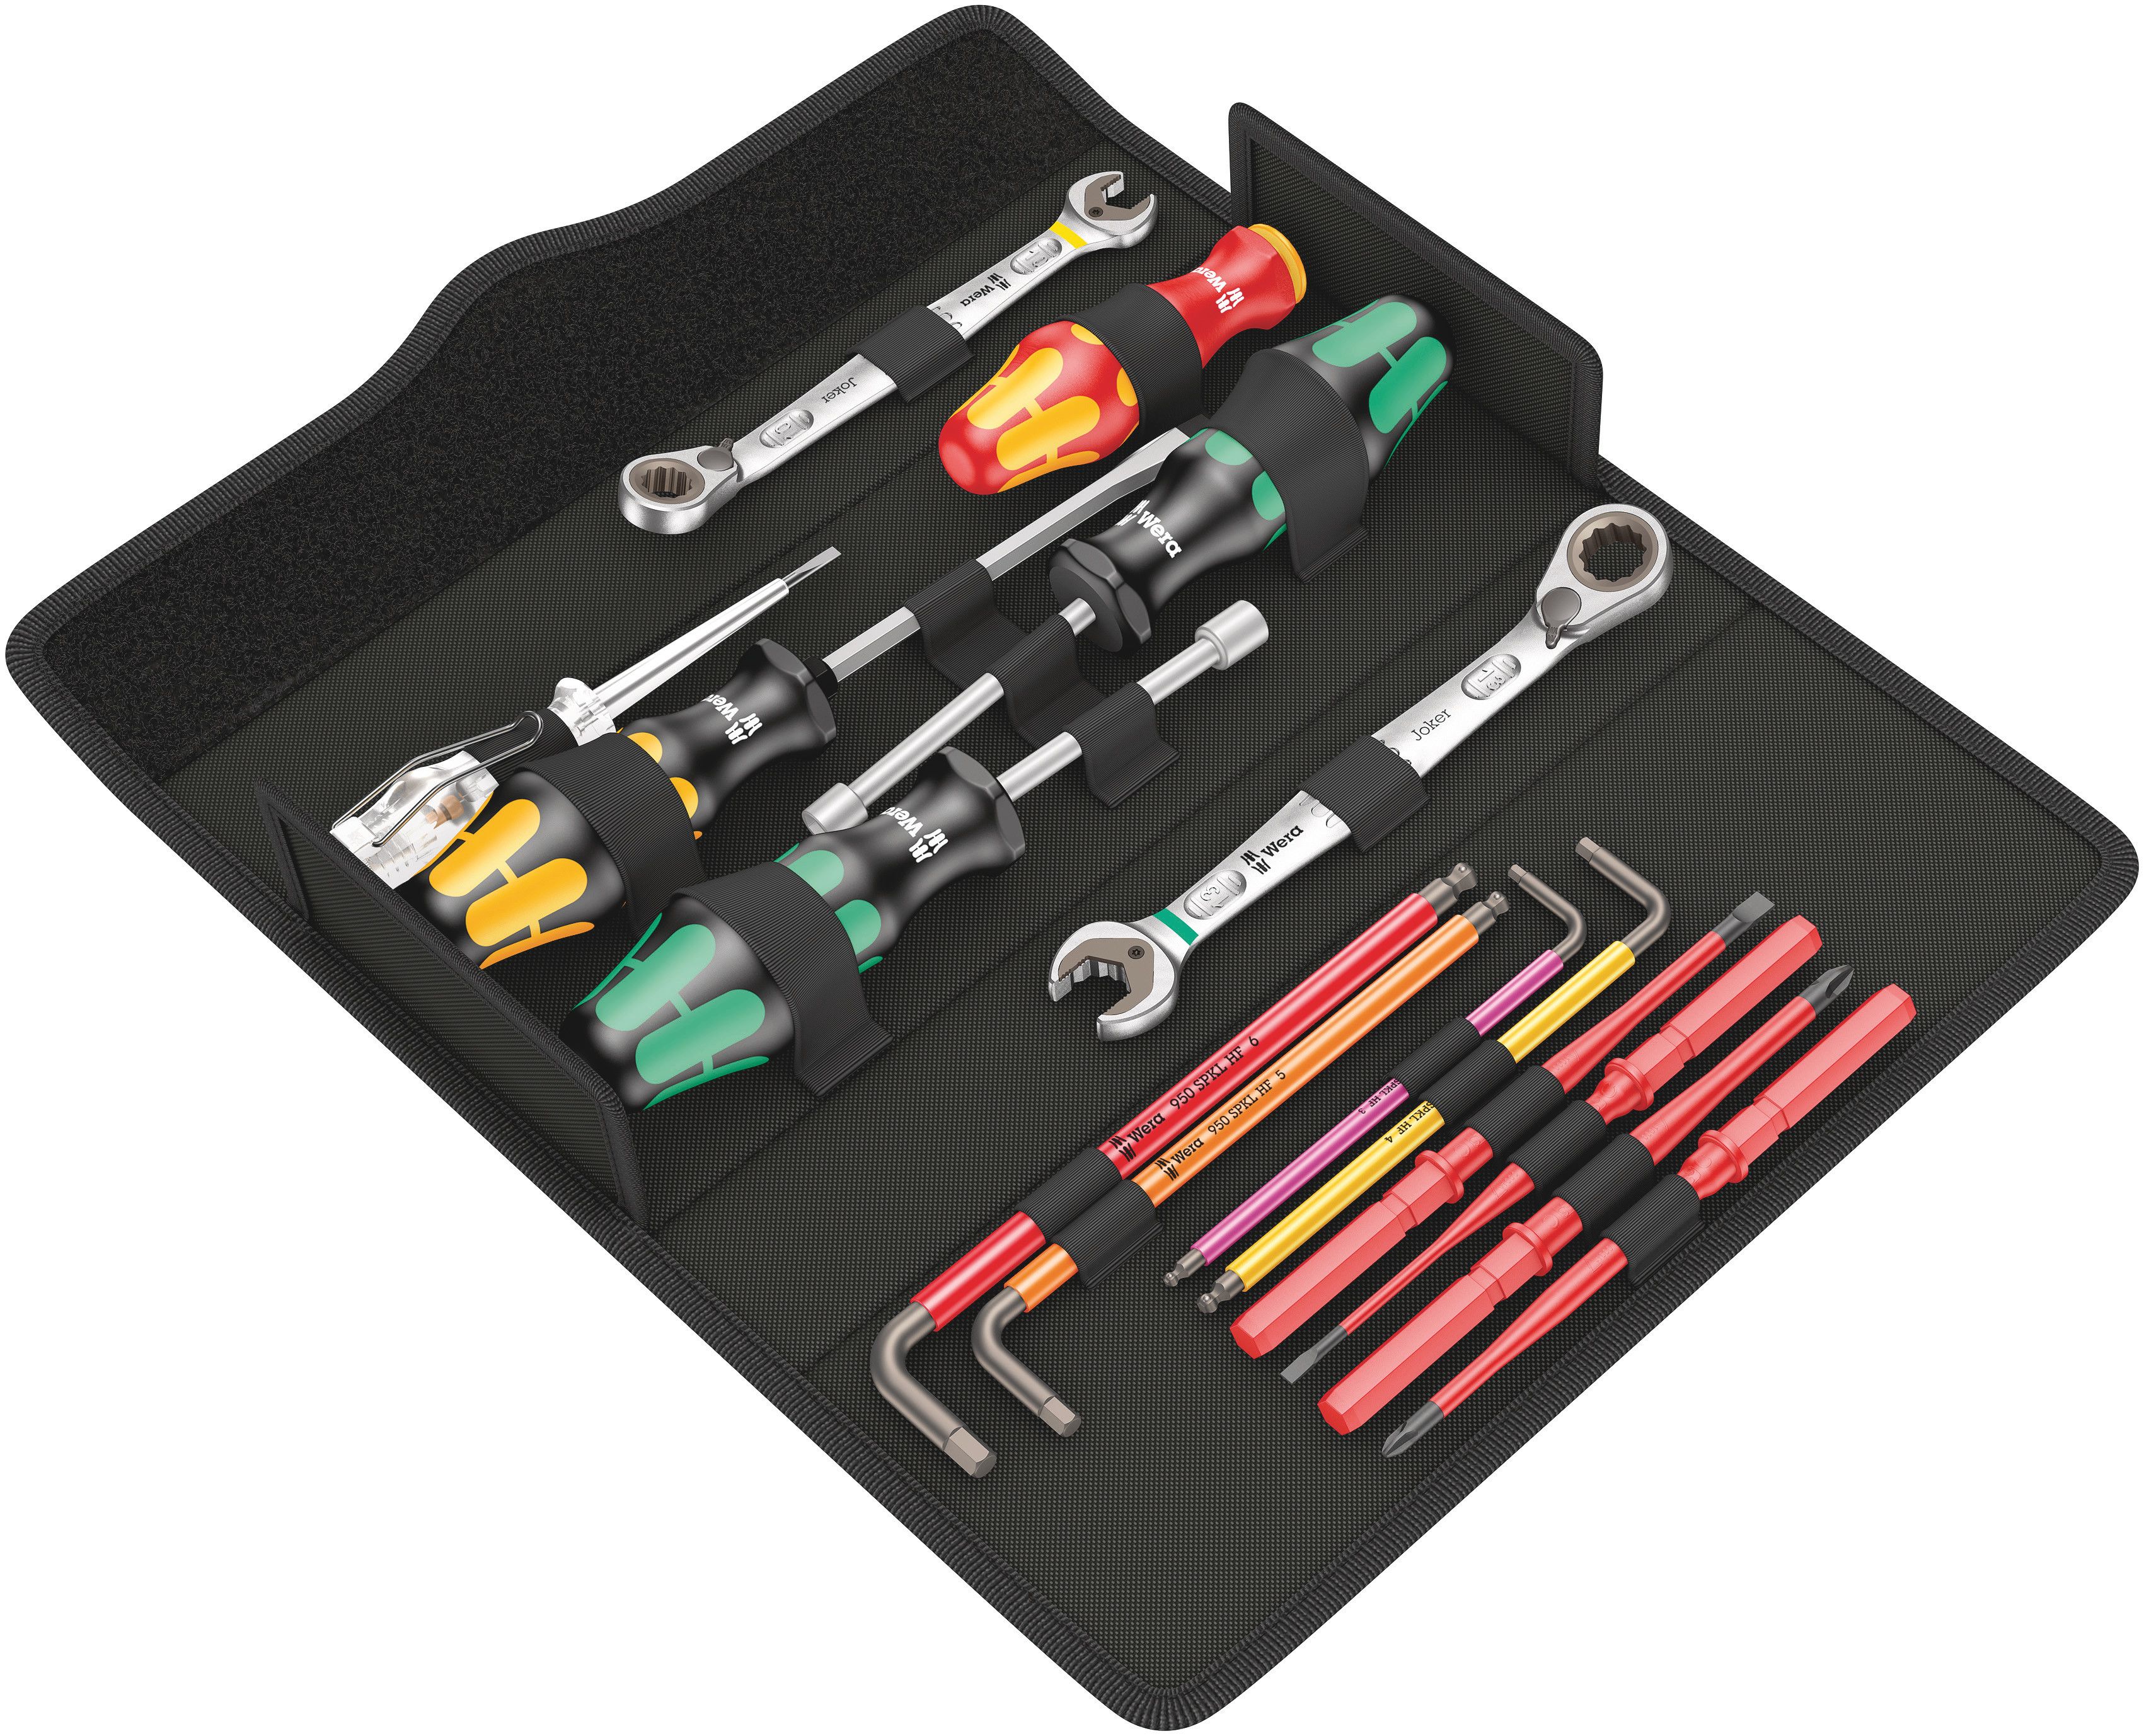 Wera 15 Piece Boxed Plumbing Tool Kit, VDE Approved